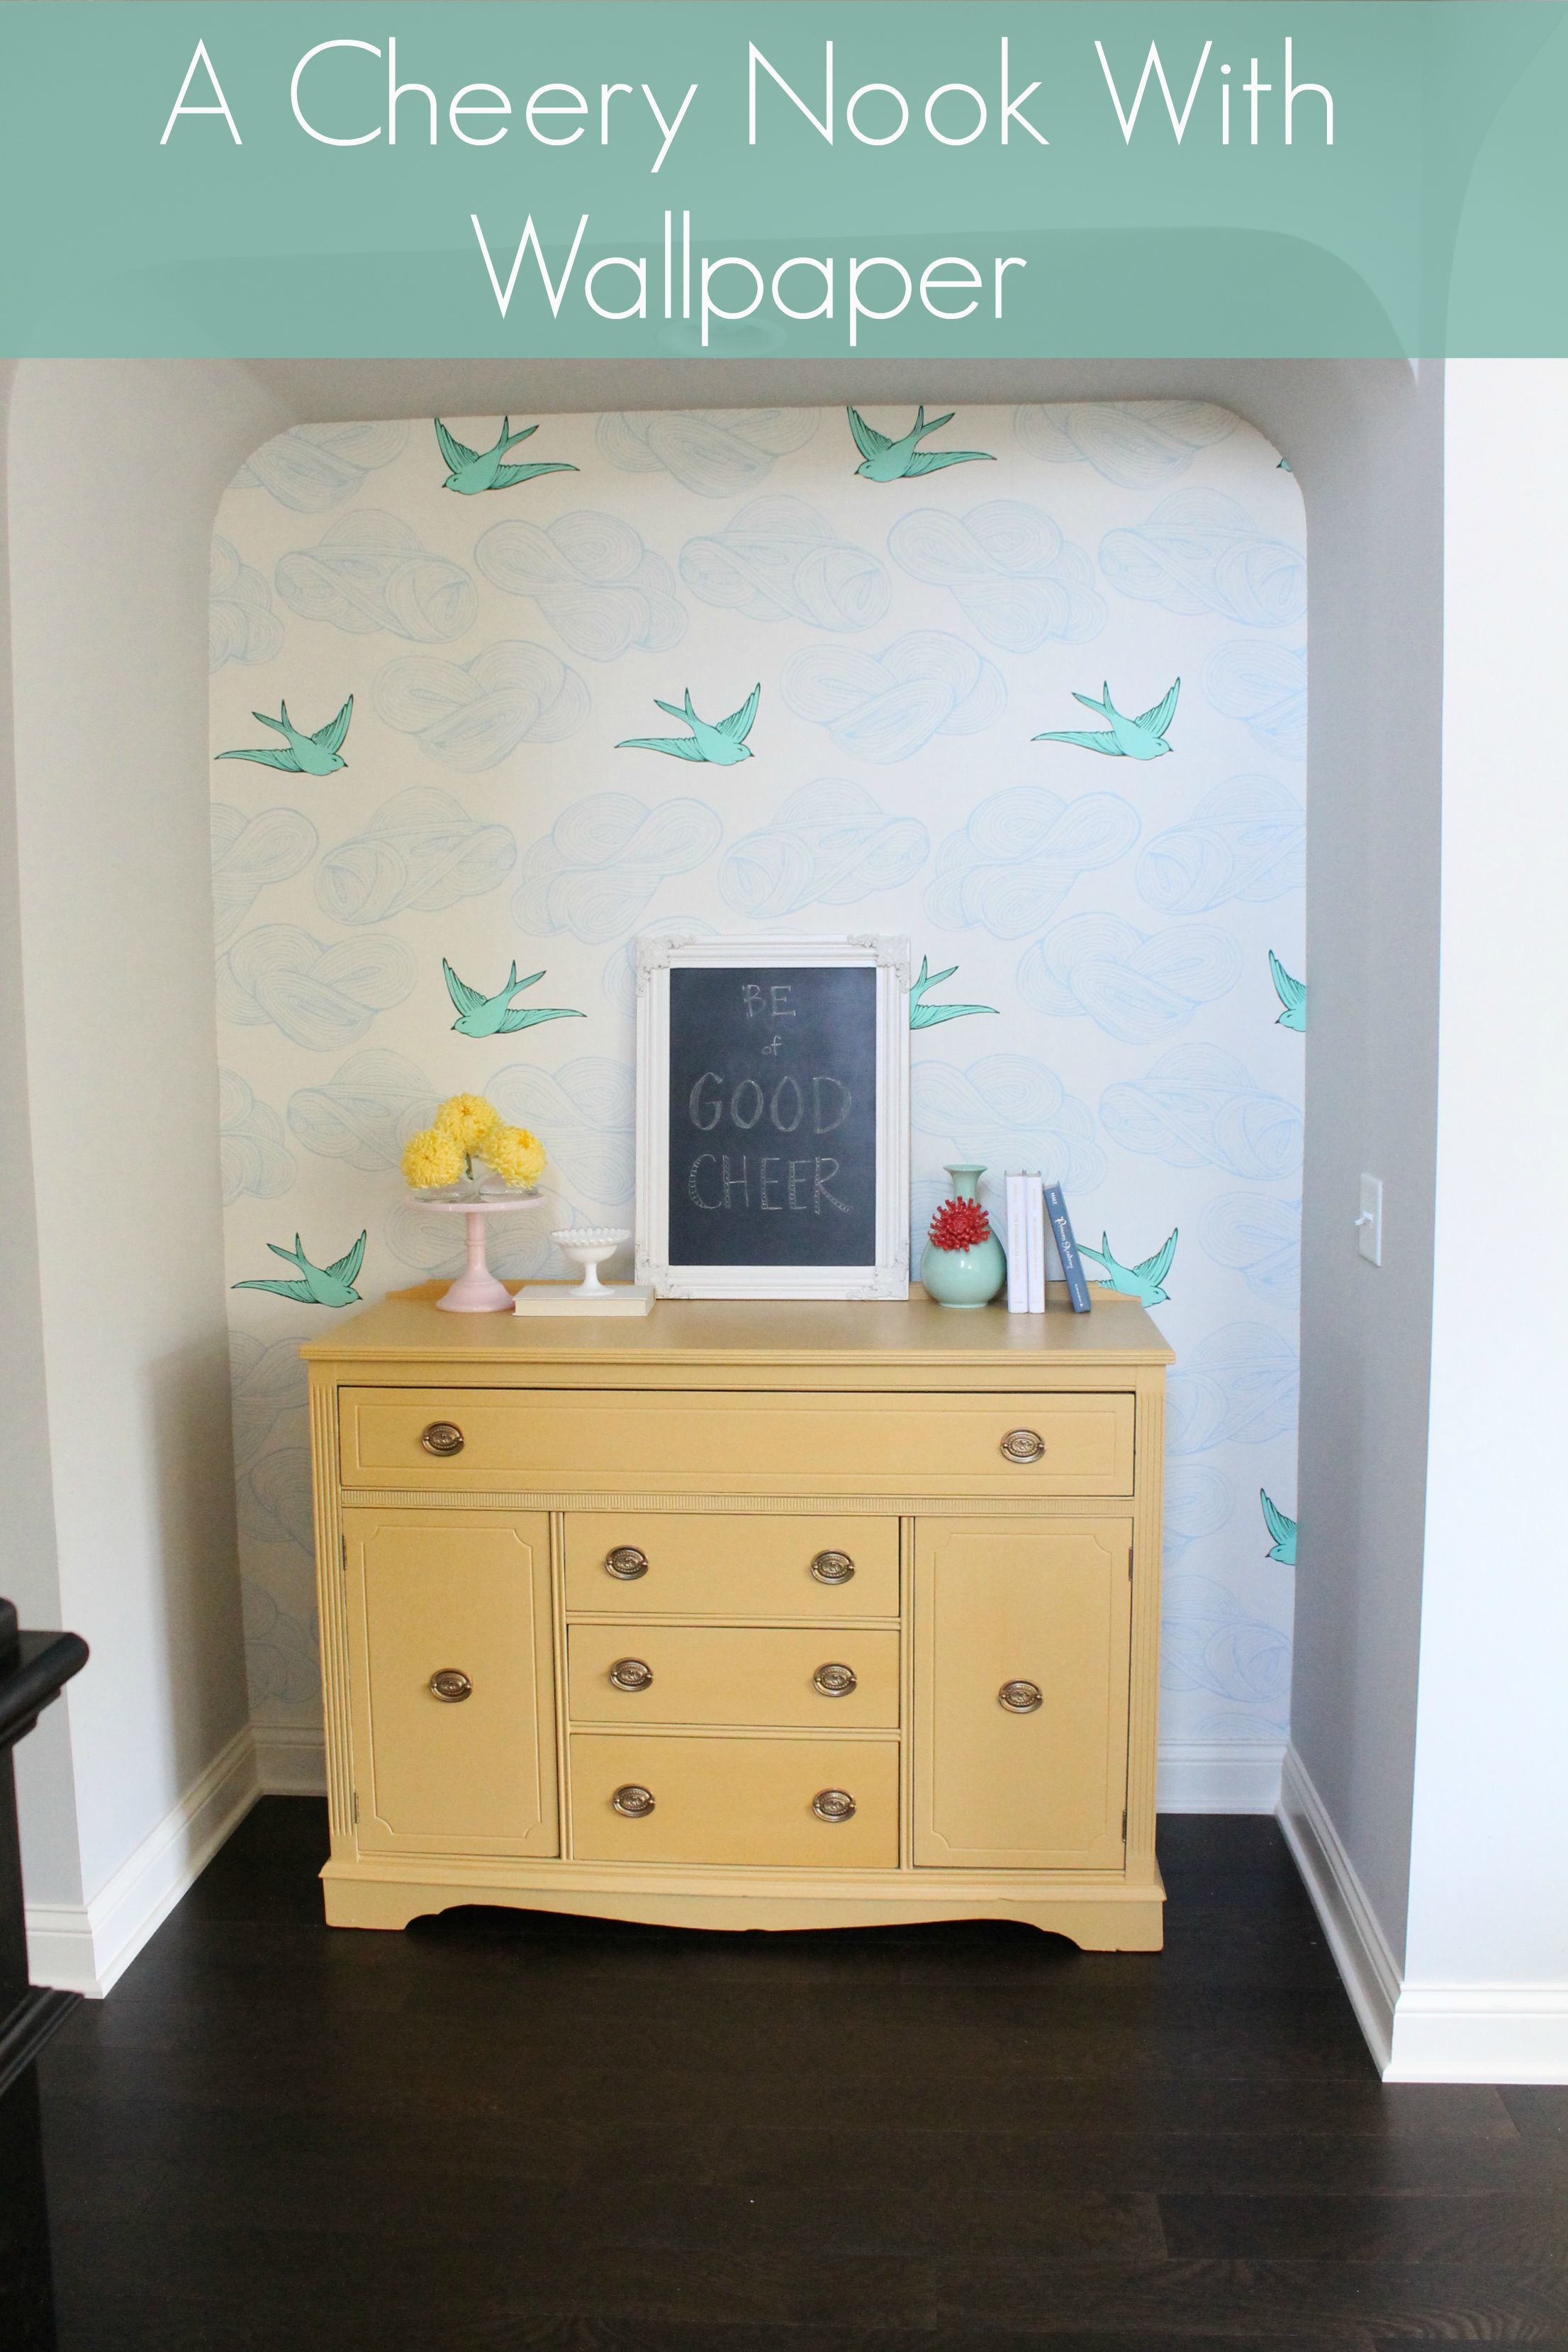 Cheery Nook with Wallpaper